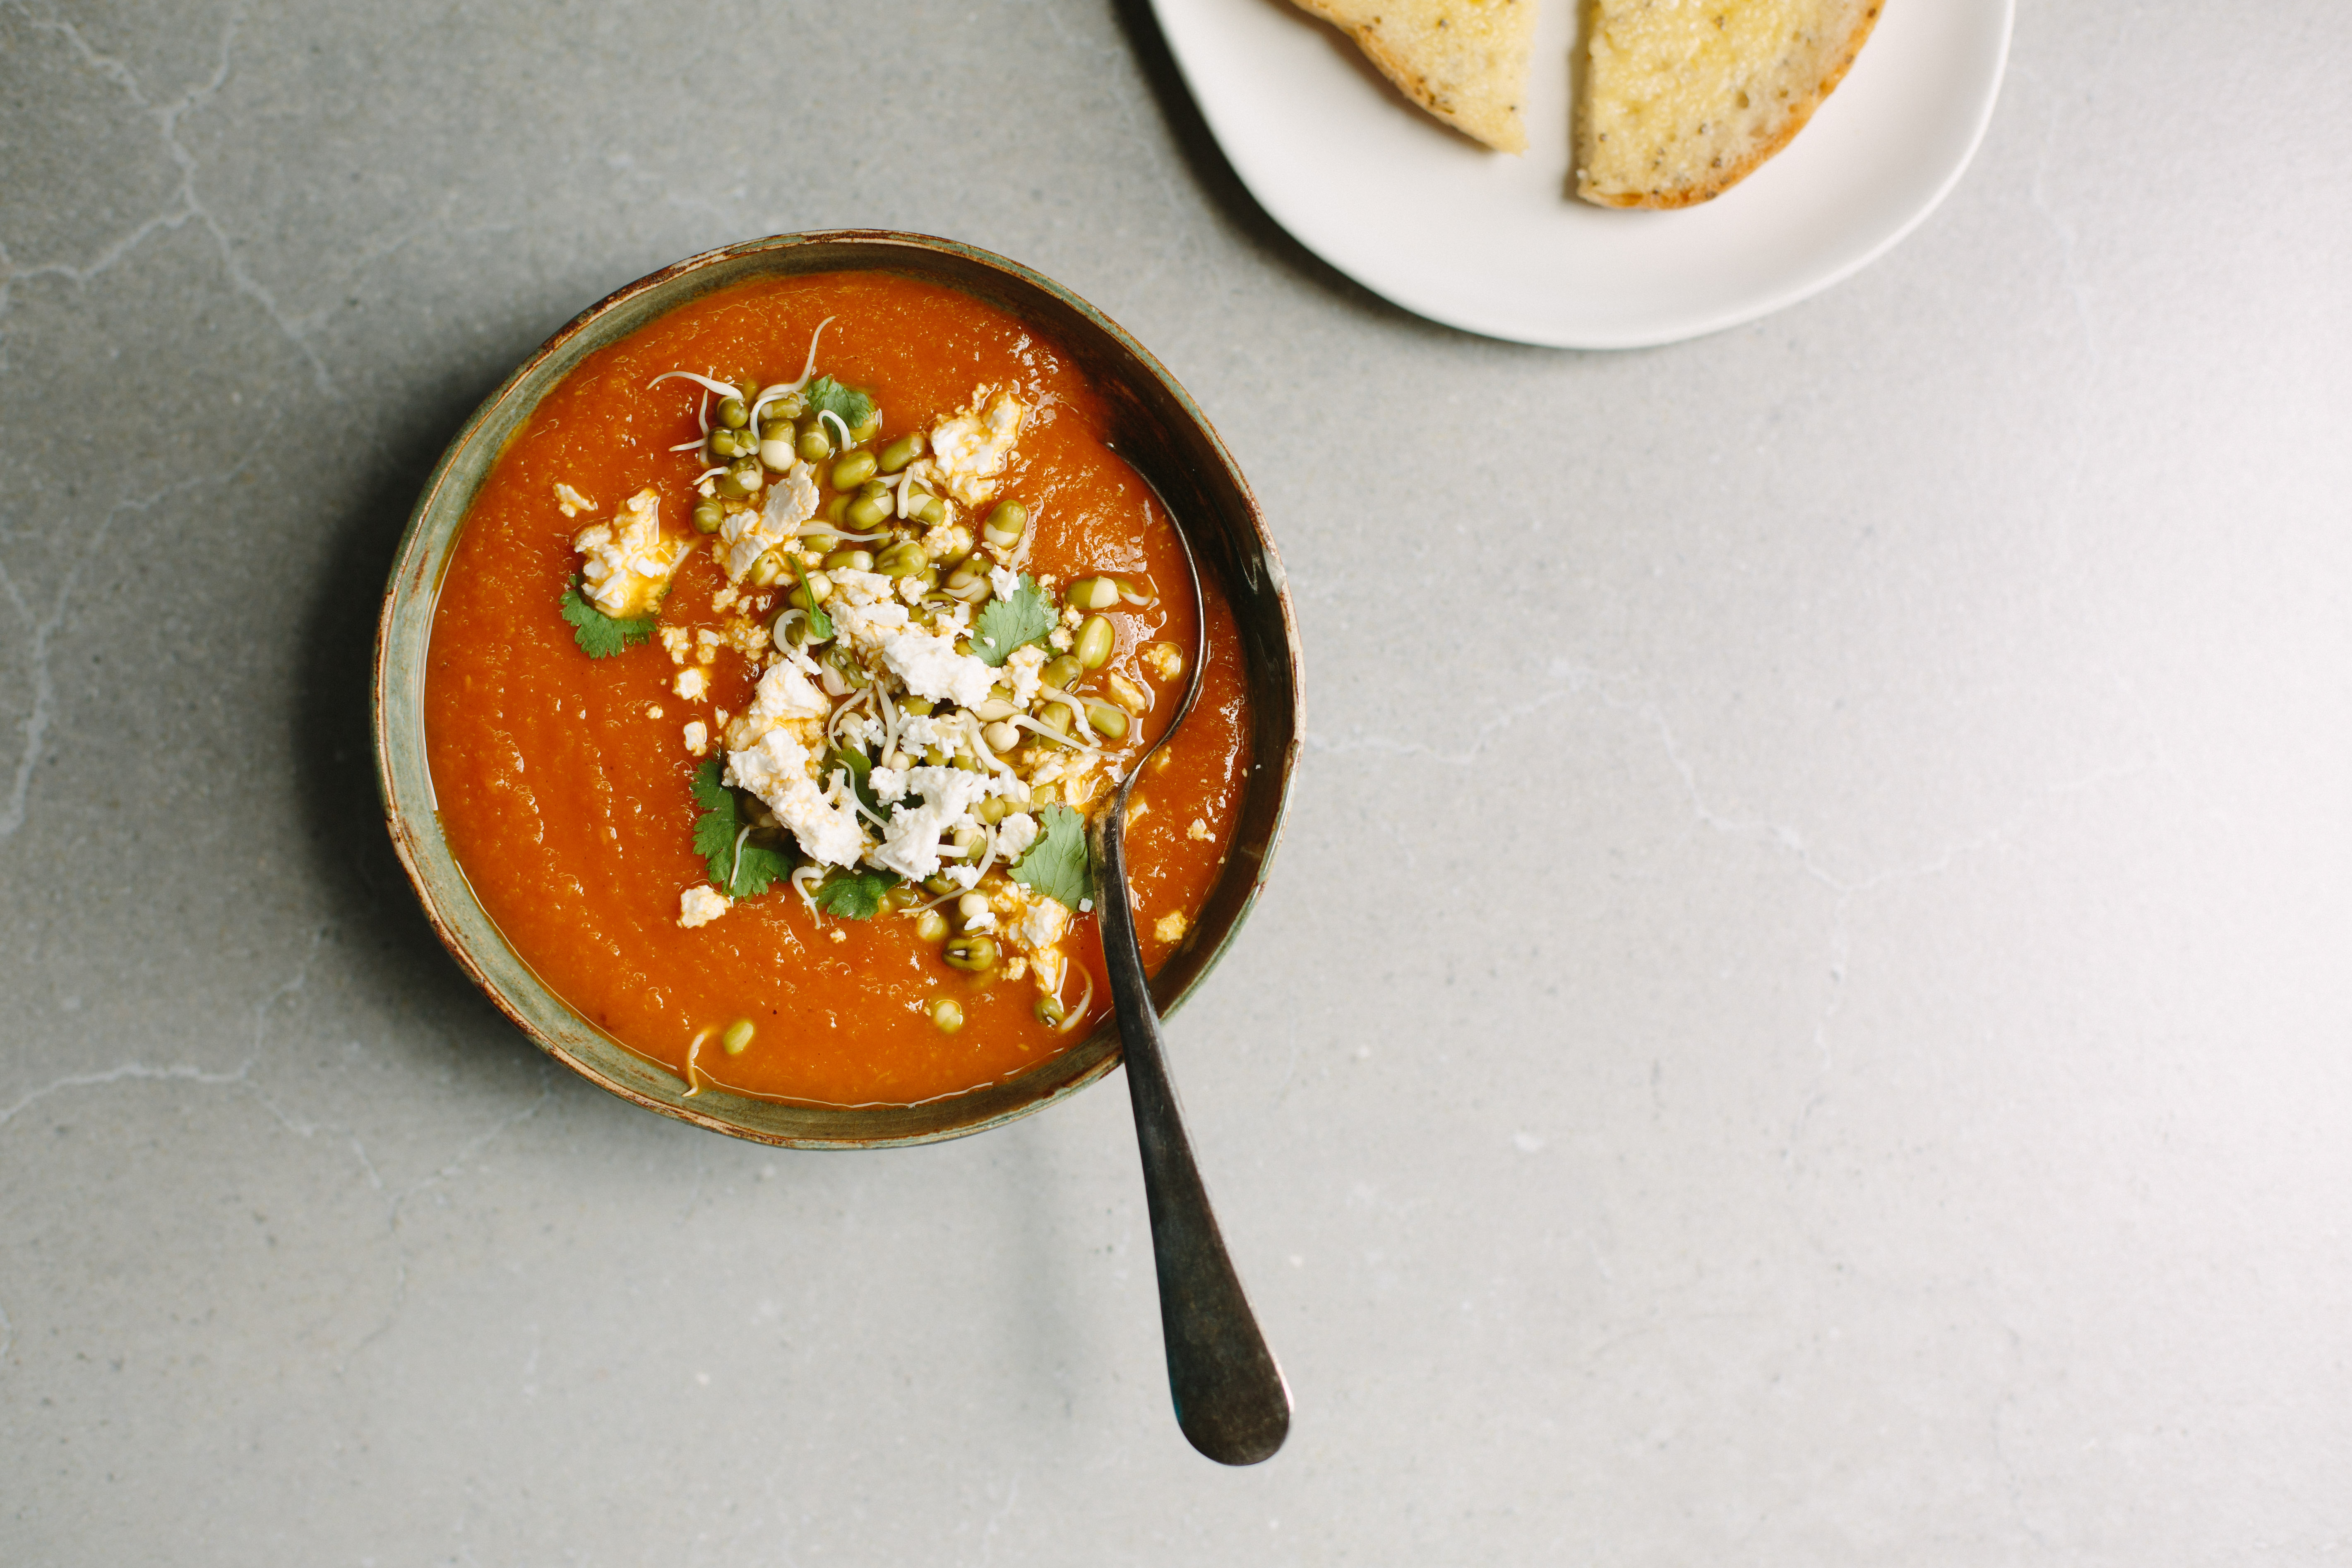 Curried carrot + red lentil soup with mung beans + feta | My Darling Lemon Thyme